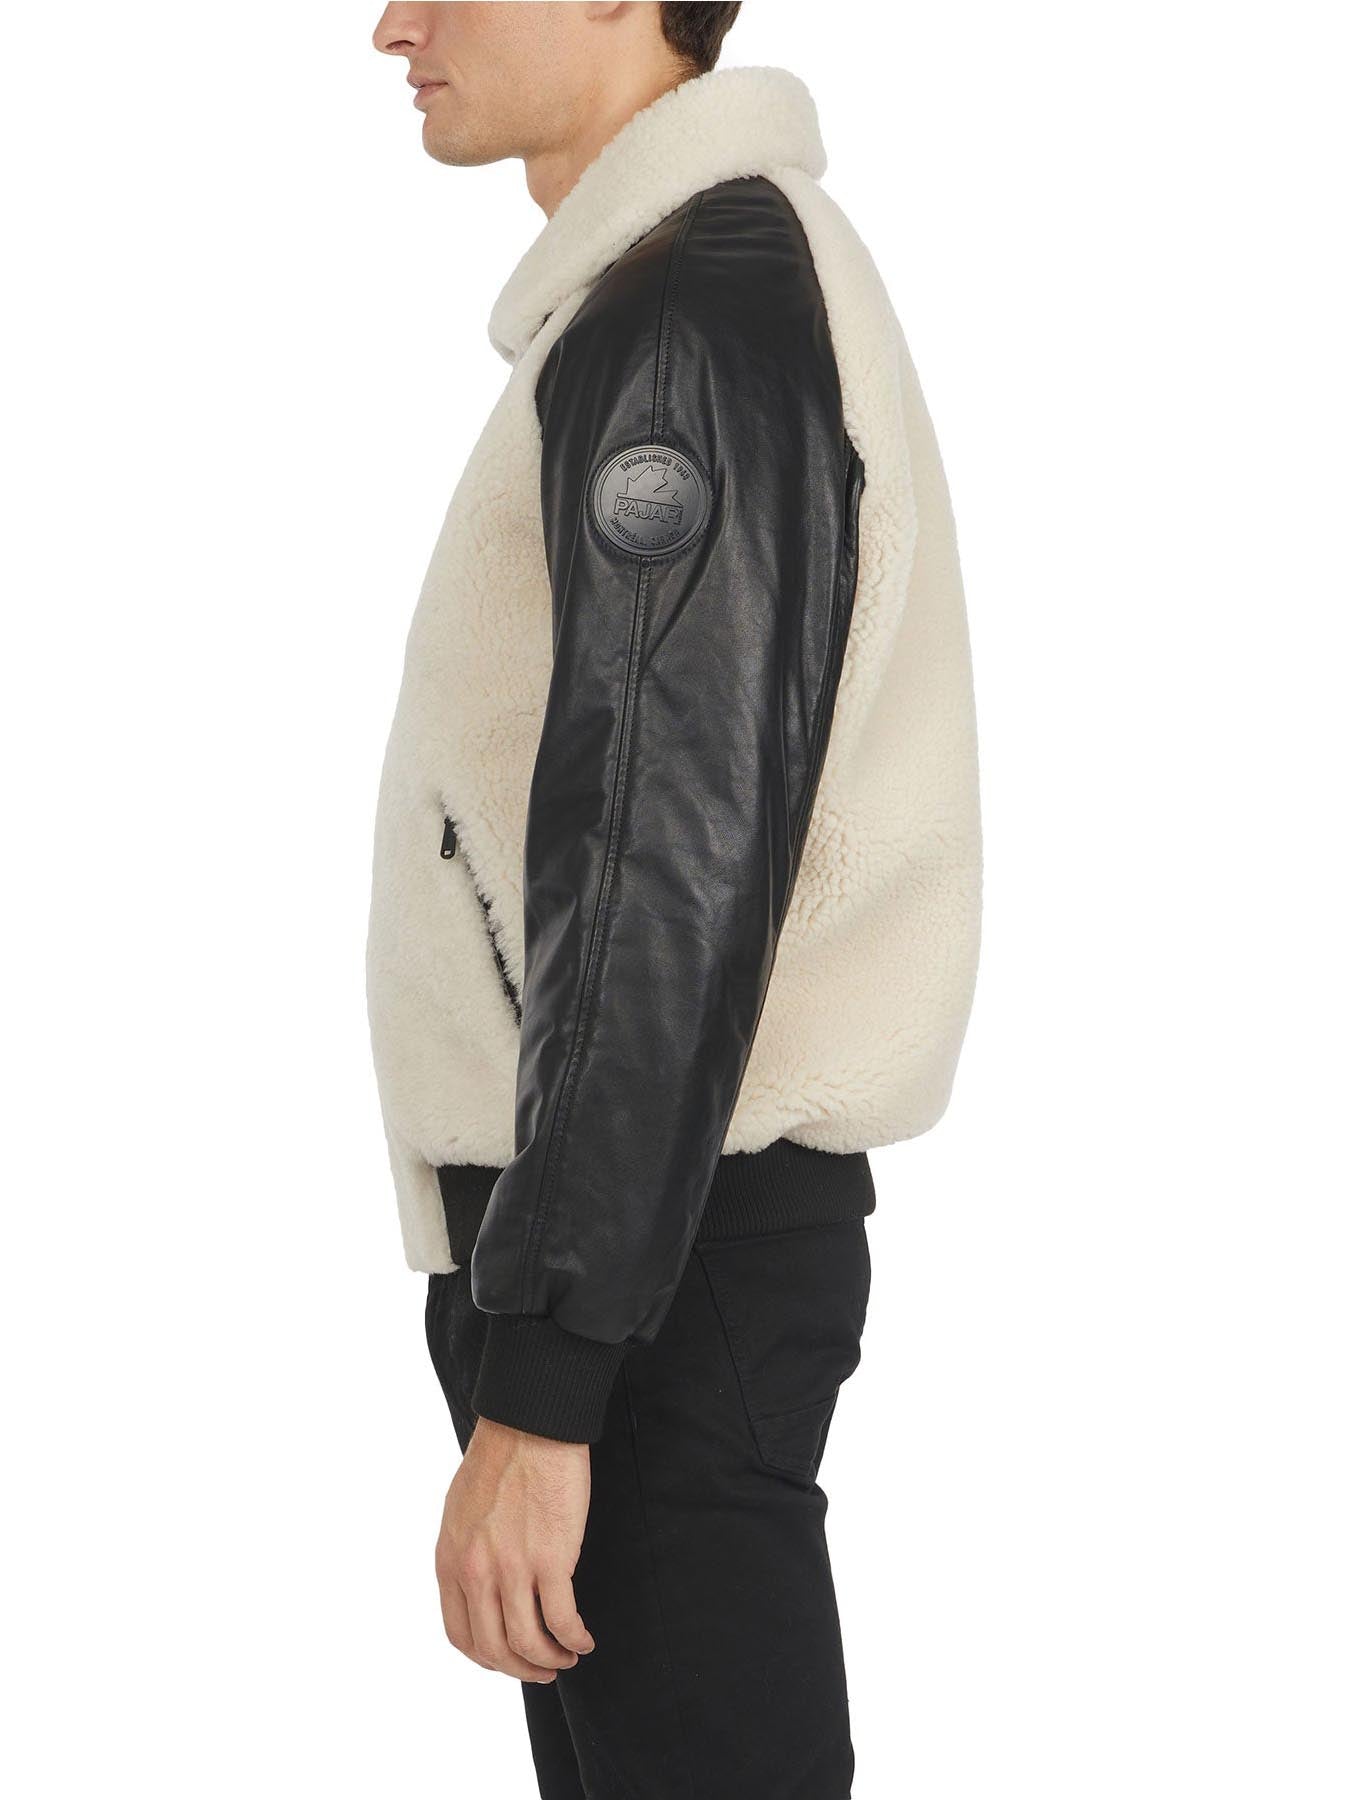 Campbell Men's Shearling and Leather Varsity Jacket